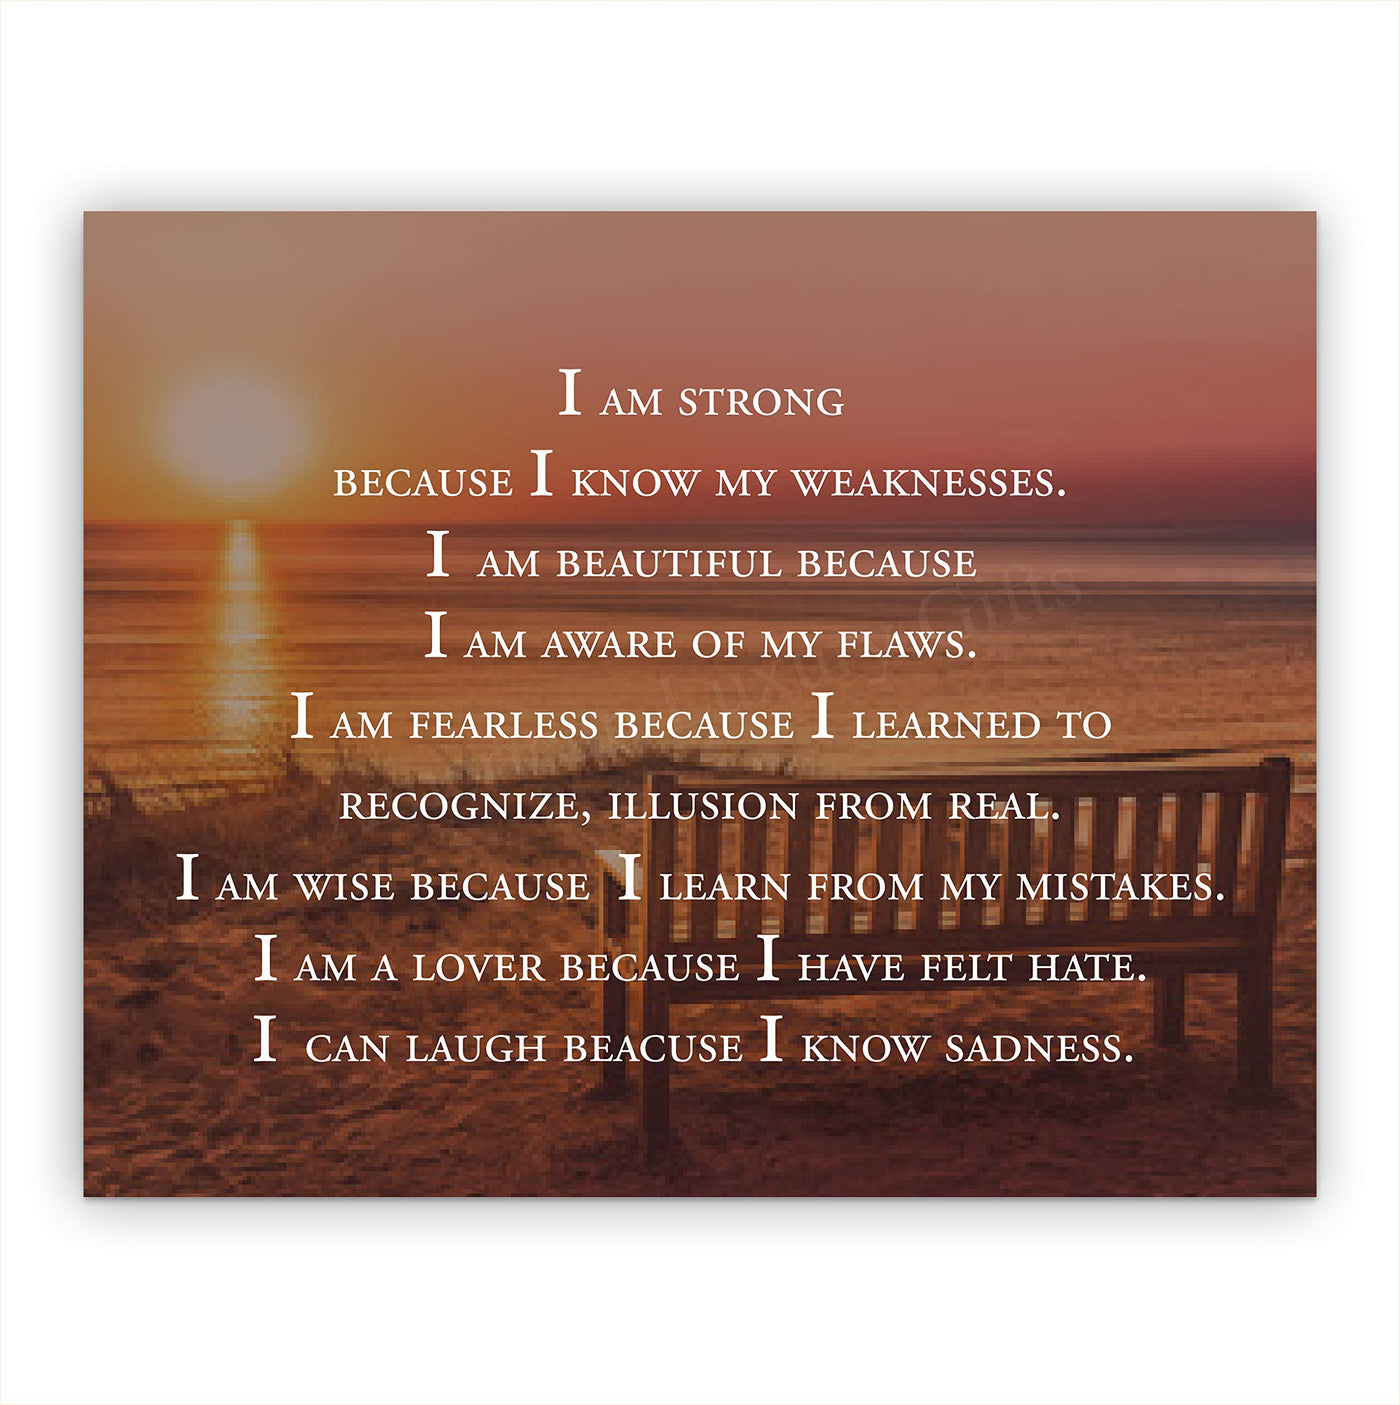 I Am Strong Because I Know My Weaknesses- Inspirational Quotes Wall Art- 10 x 8" Typographic Wall Sign-Ready to Frame. Modern Print for Home-Office-Classroom Decor. Great Motivational Gift for All!